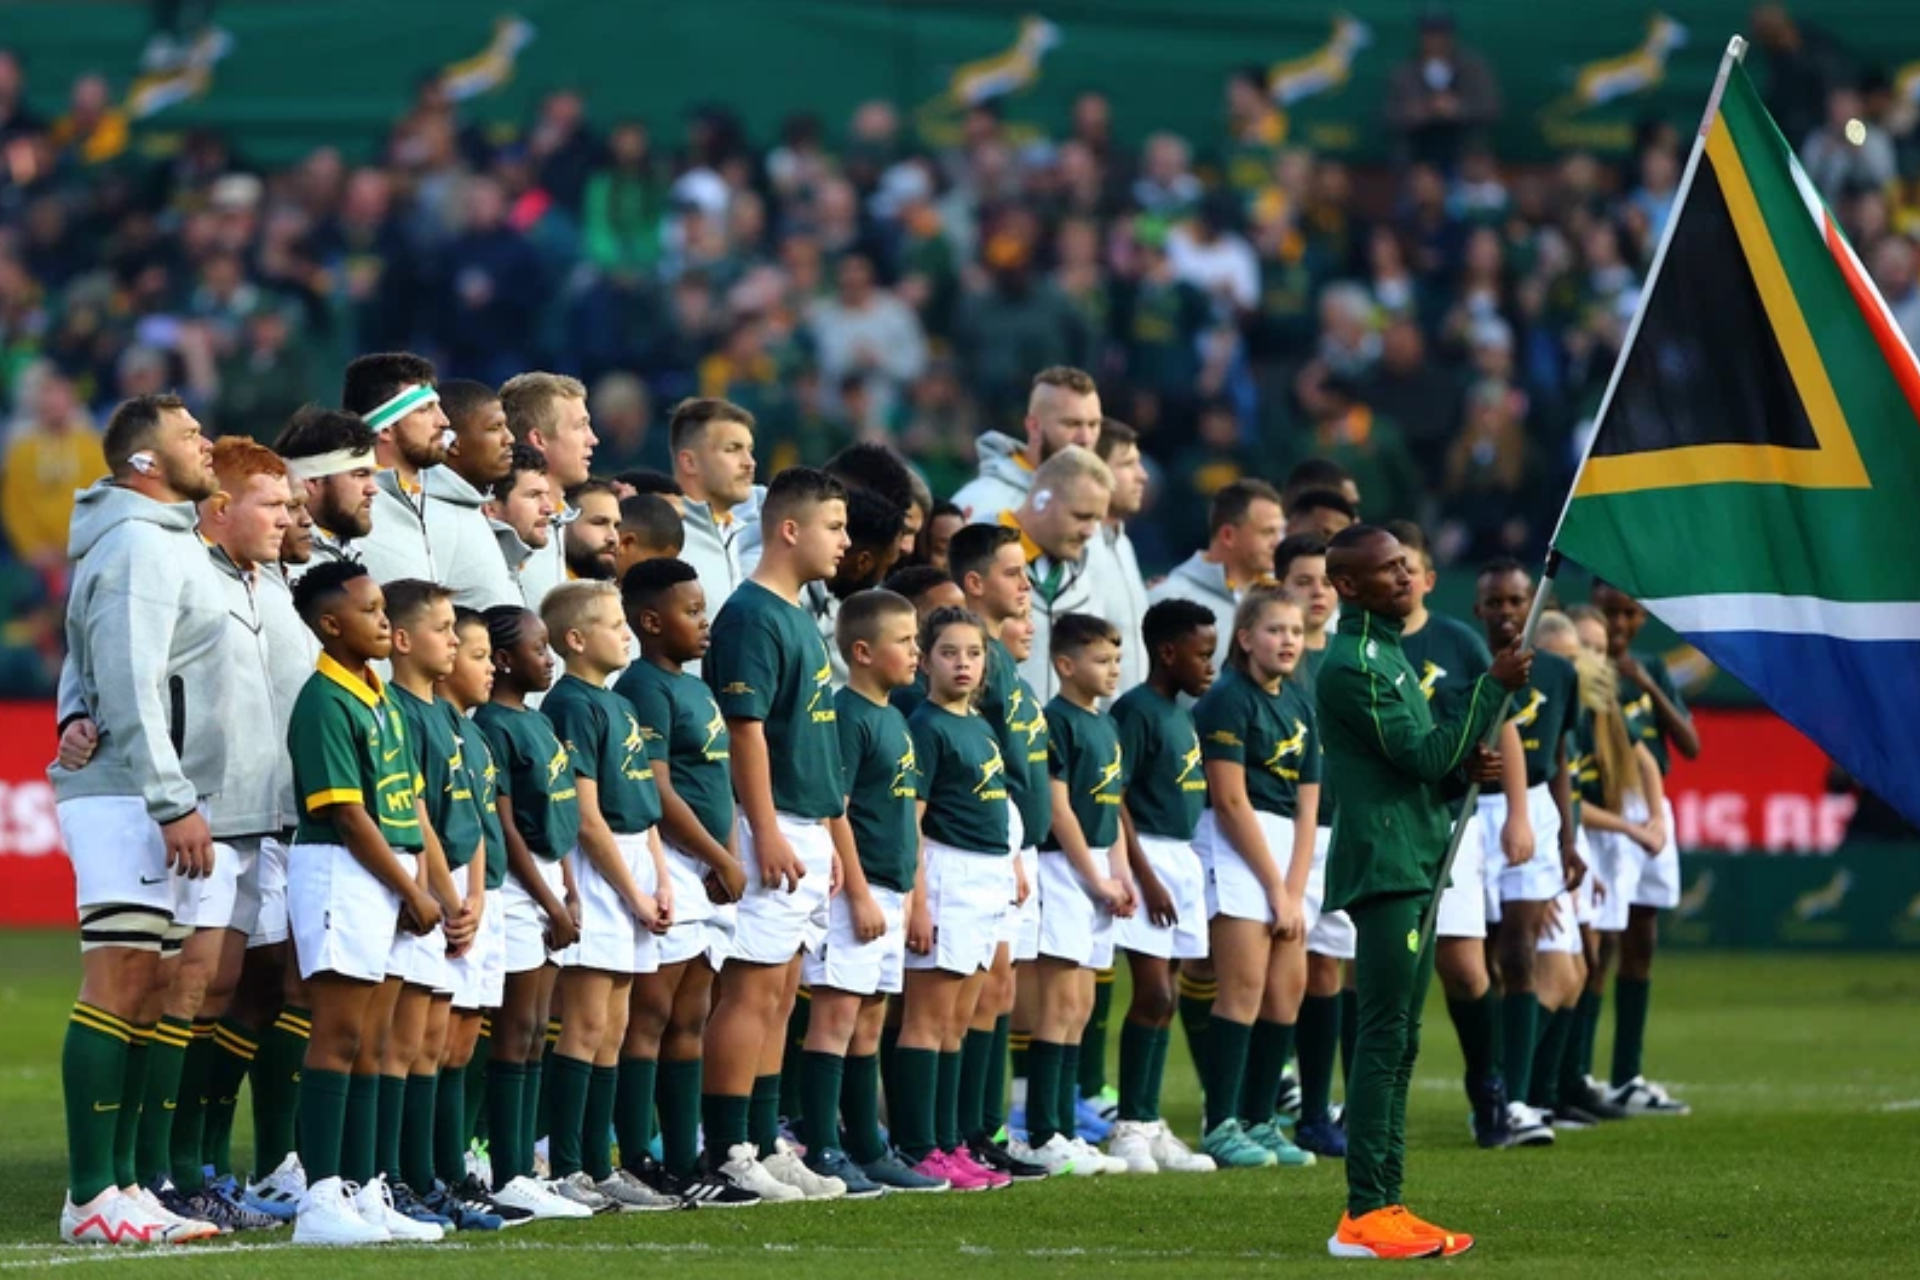 Springboks Rugby World Cup group